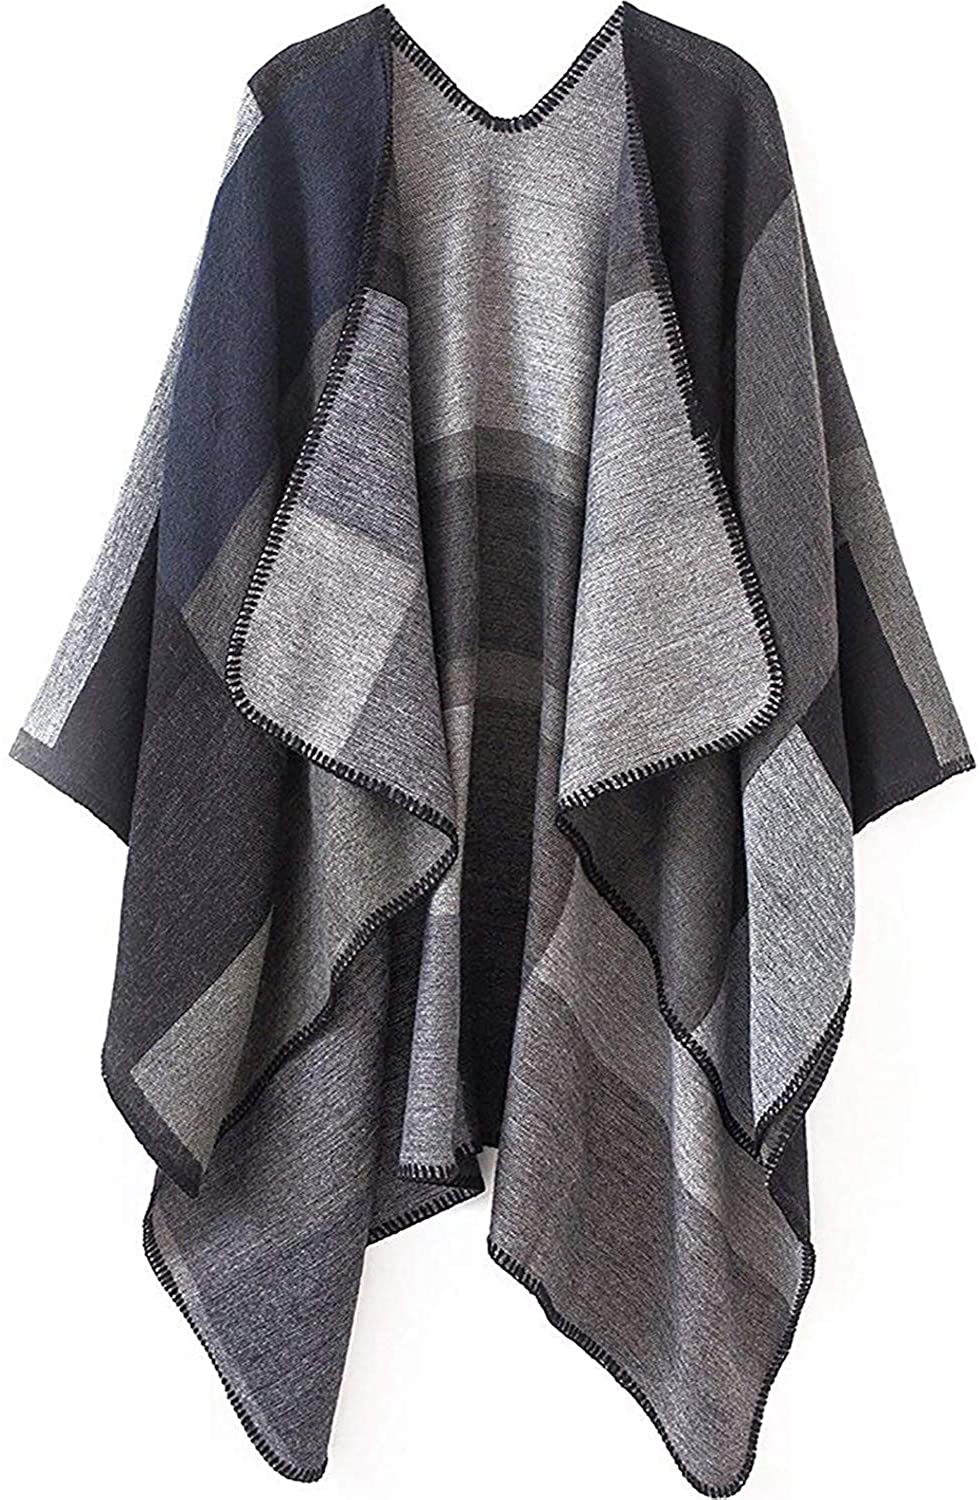 Women's Shawls and Wraps Open Front Poncho Cape Cardigan Winter Blanket Sweater 